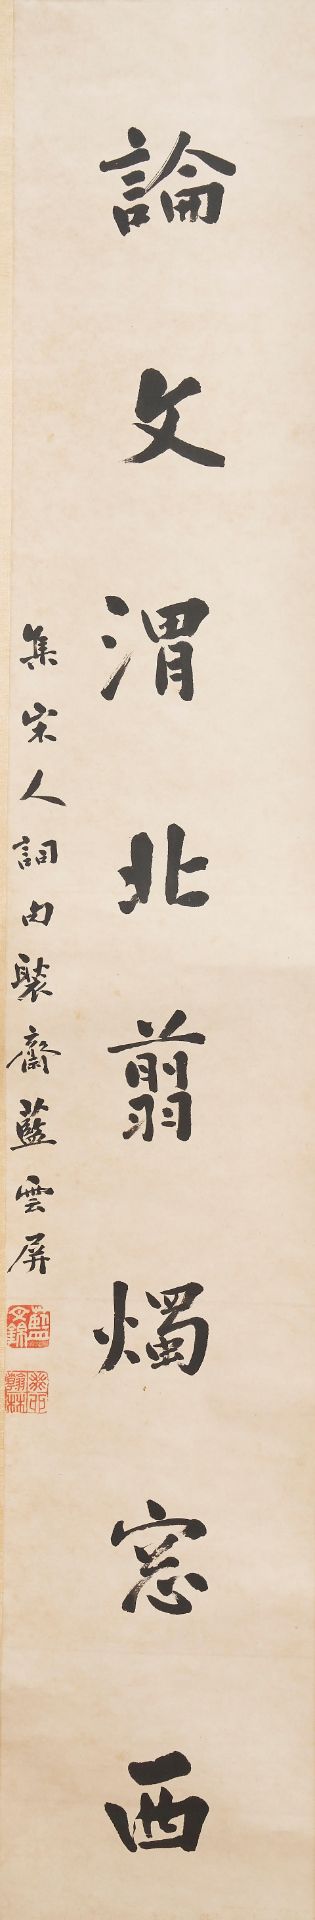 Lan Yunping (1875-?) Calligraphy Couplet in Running Style (2) - Image 2 of 3